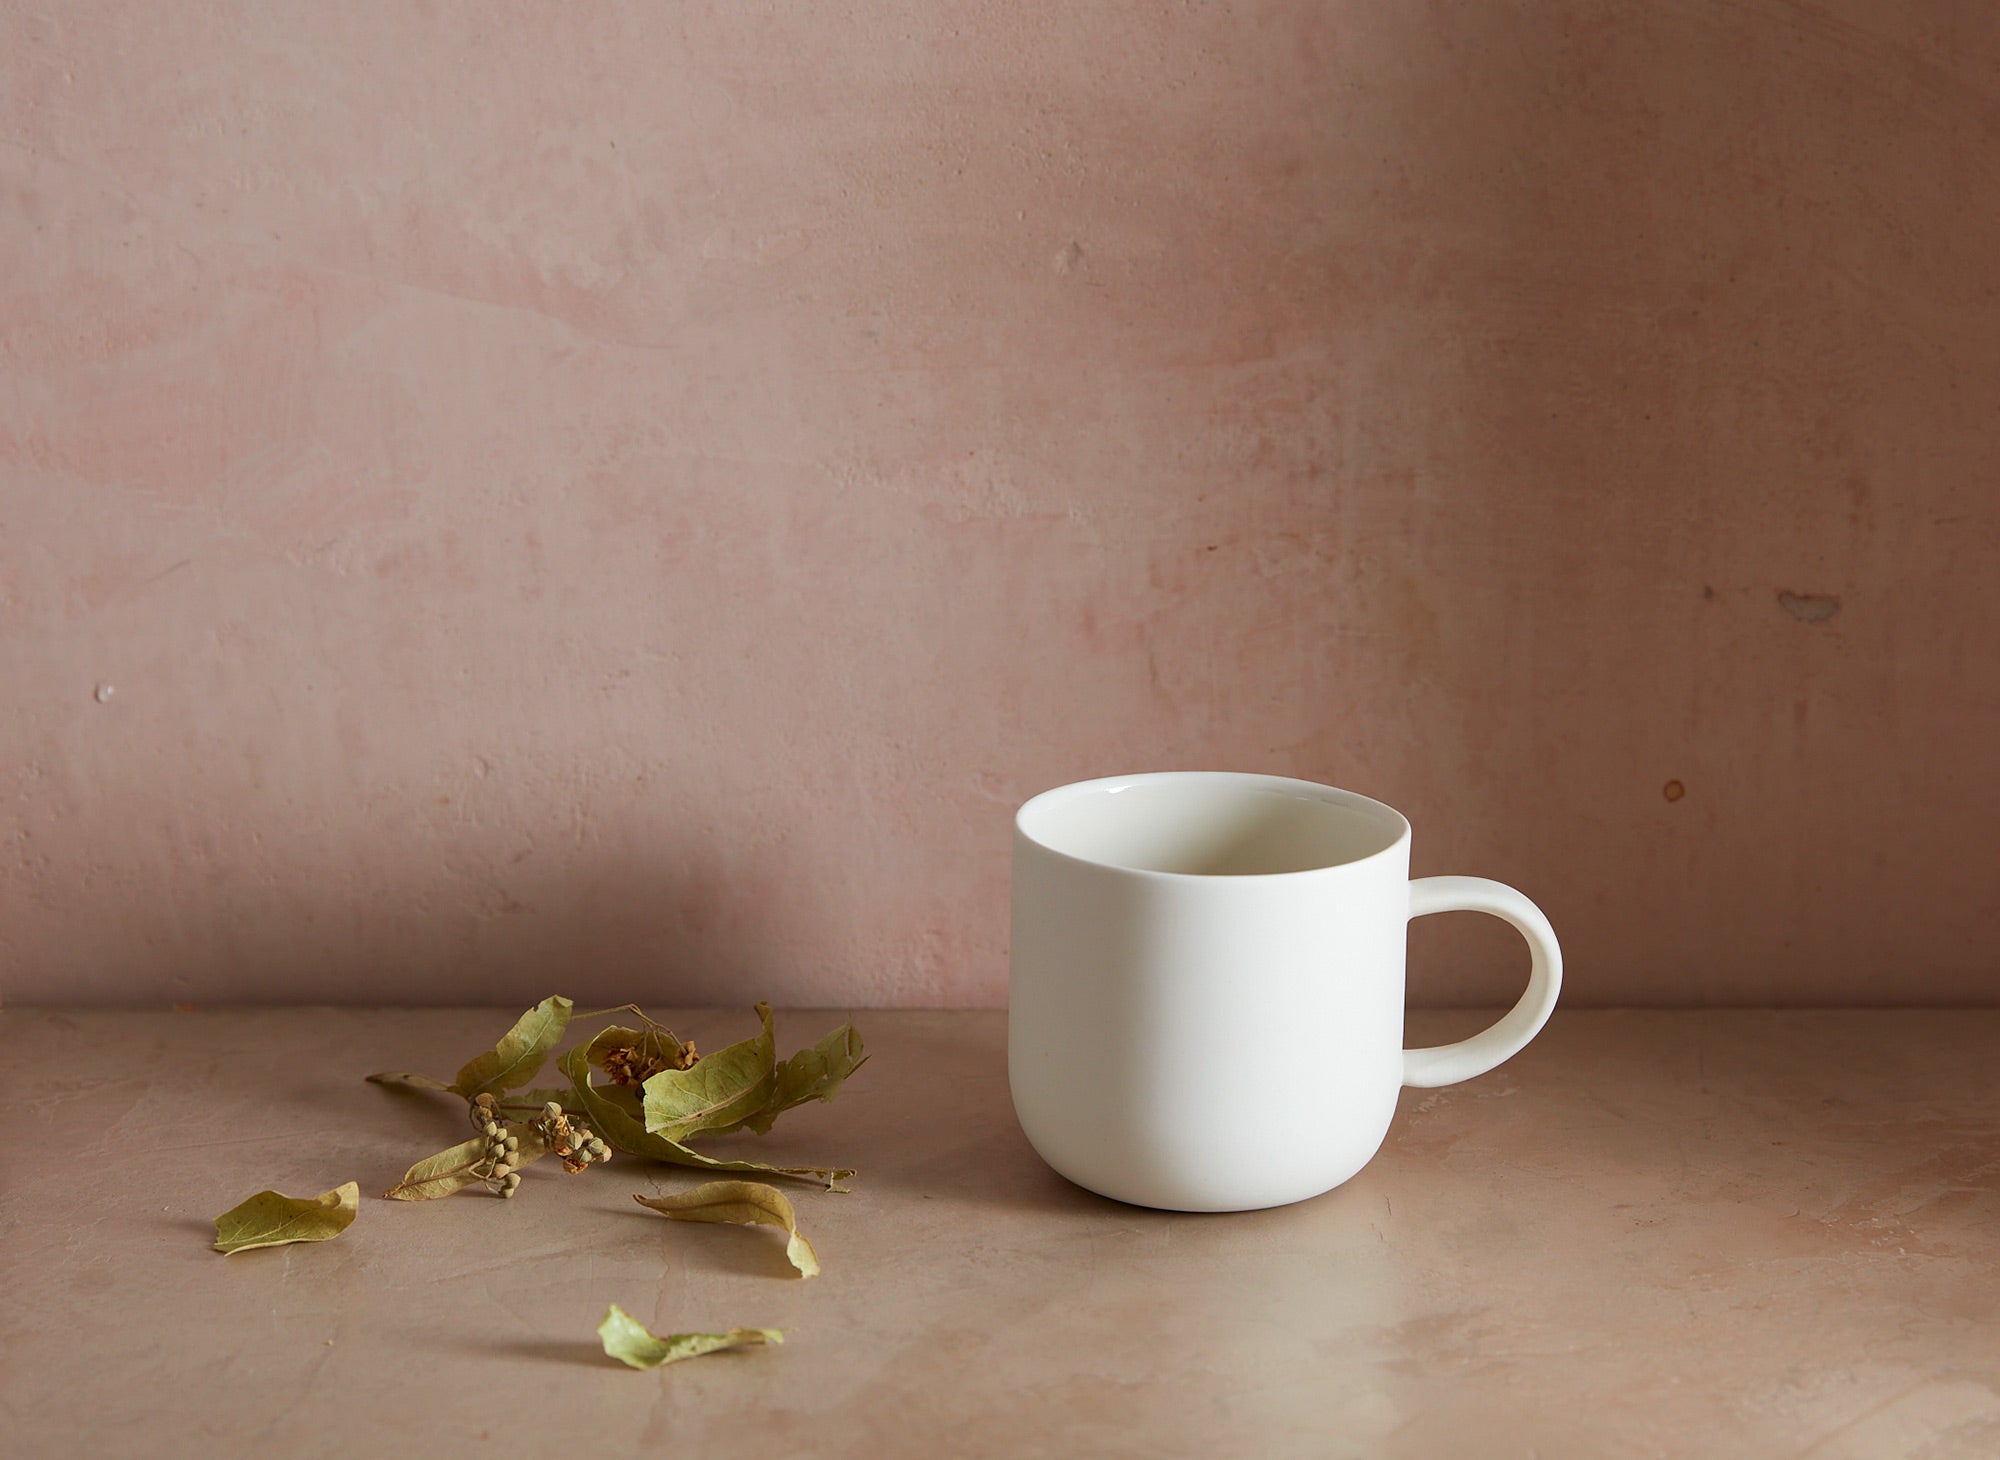 Shop luxury tea cups from BELLOCQ and discover your new tea ritual. Explore unique, modern and traditional Japanese tea cups from the finest artisans in the world.